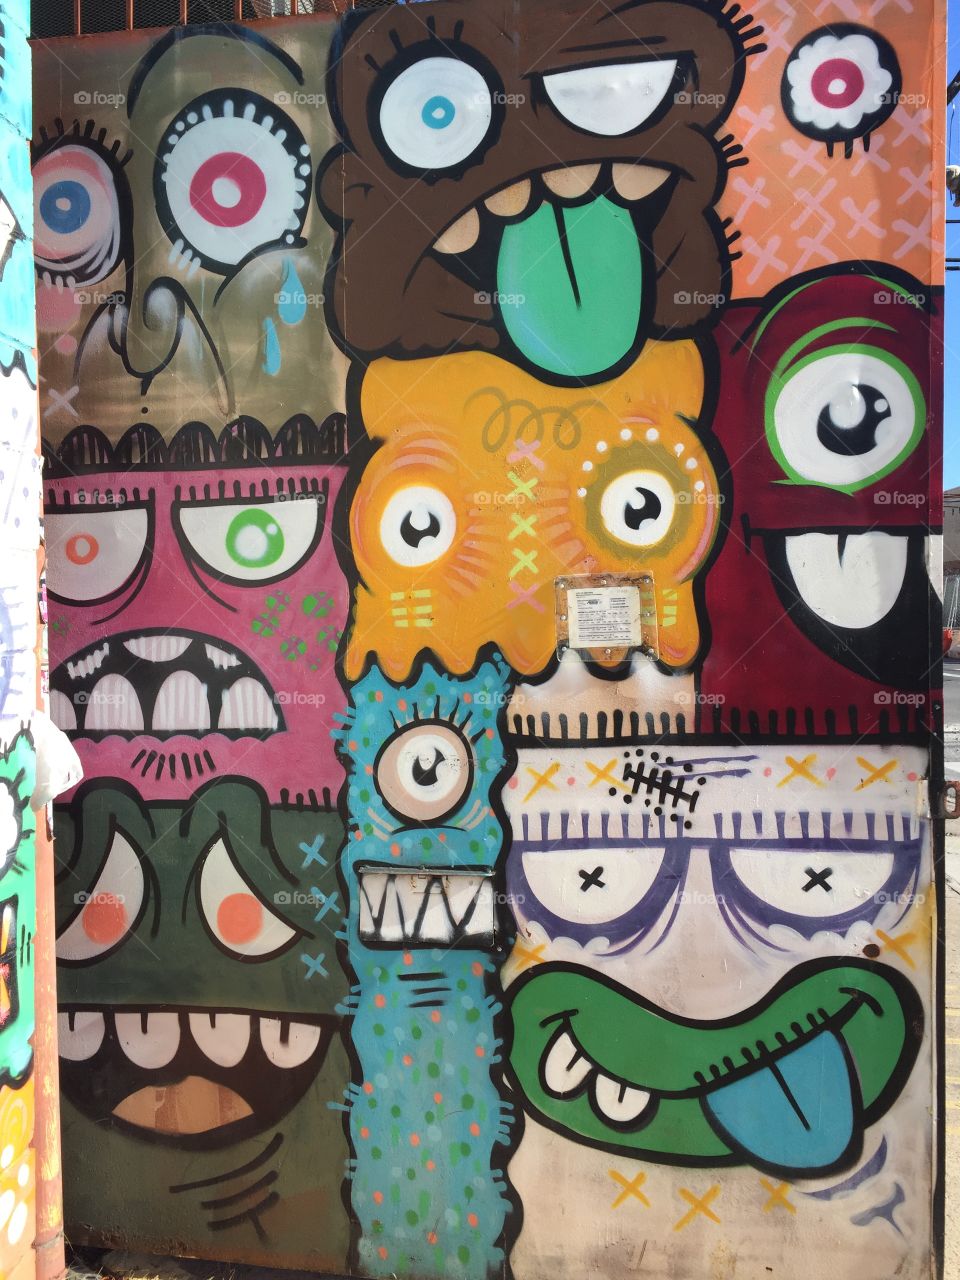 This is a picture of urban graffiti in Brooklyn . The picture depicts extraterrestrial faces with different emotions. The artwork is done uniquely with extreme detail. Looking upon the faces you have a retro feel.